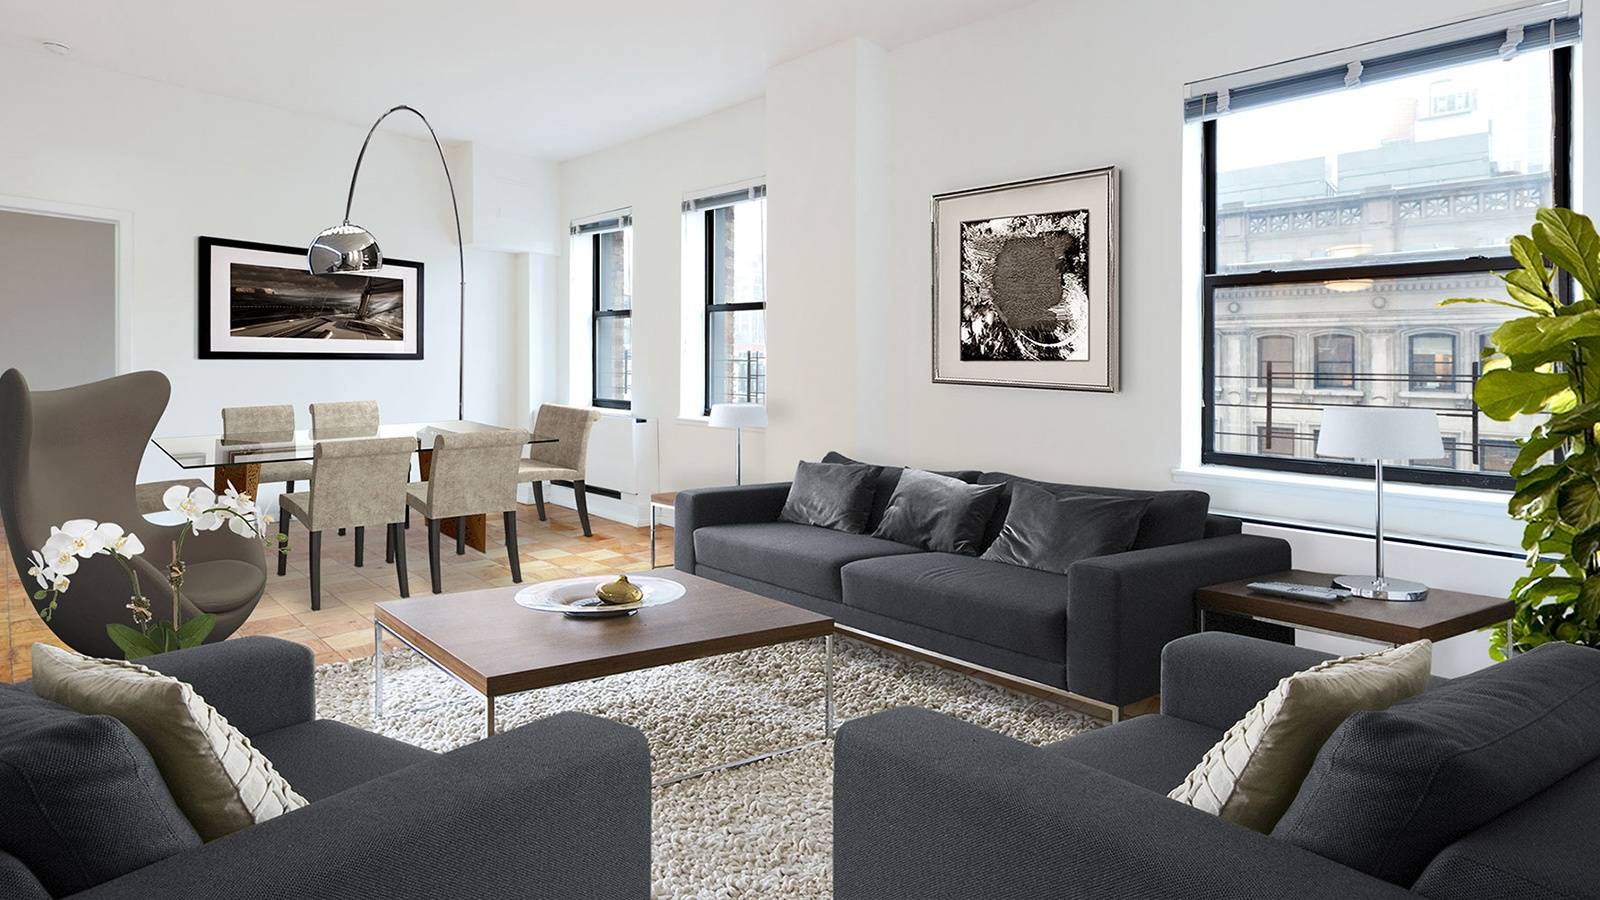 Midtown's Oasis - a 2 Bed Flex /  2 bath Apt in City's Most Exciting Neighborhood.